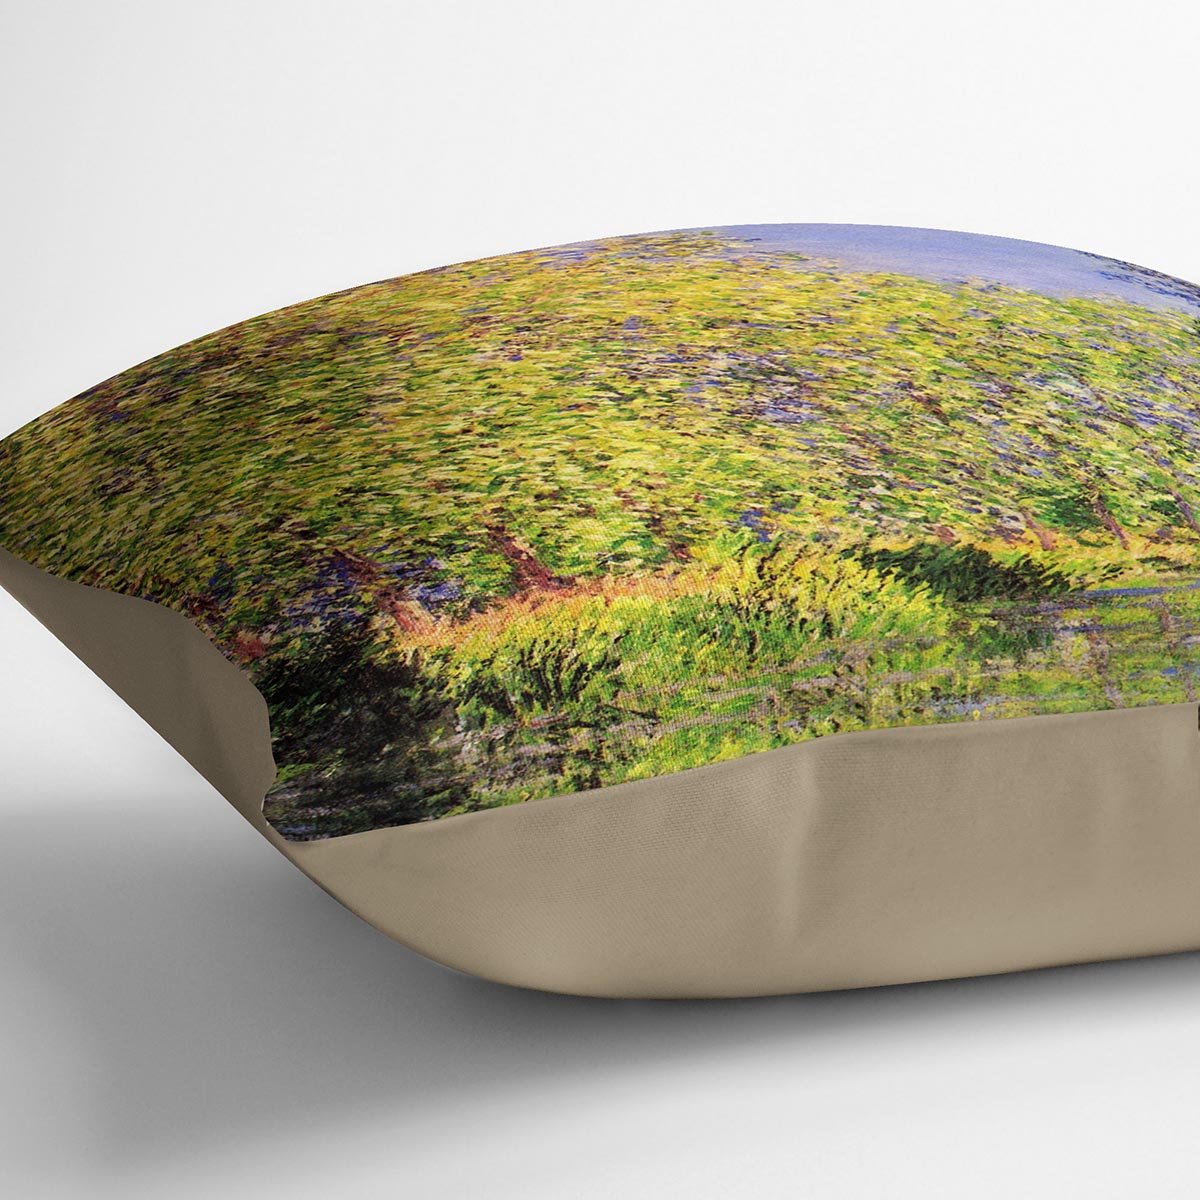 A bend of the Epte Giverny by Monet Throw Pillow